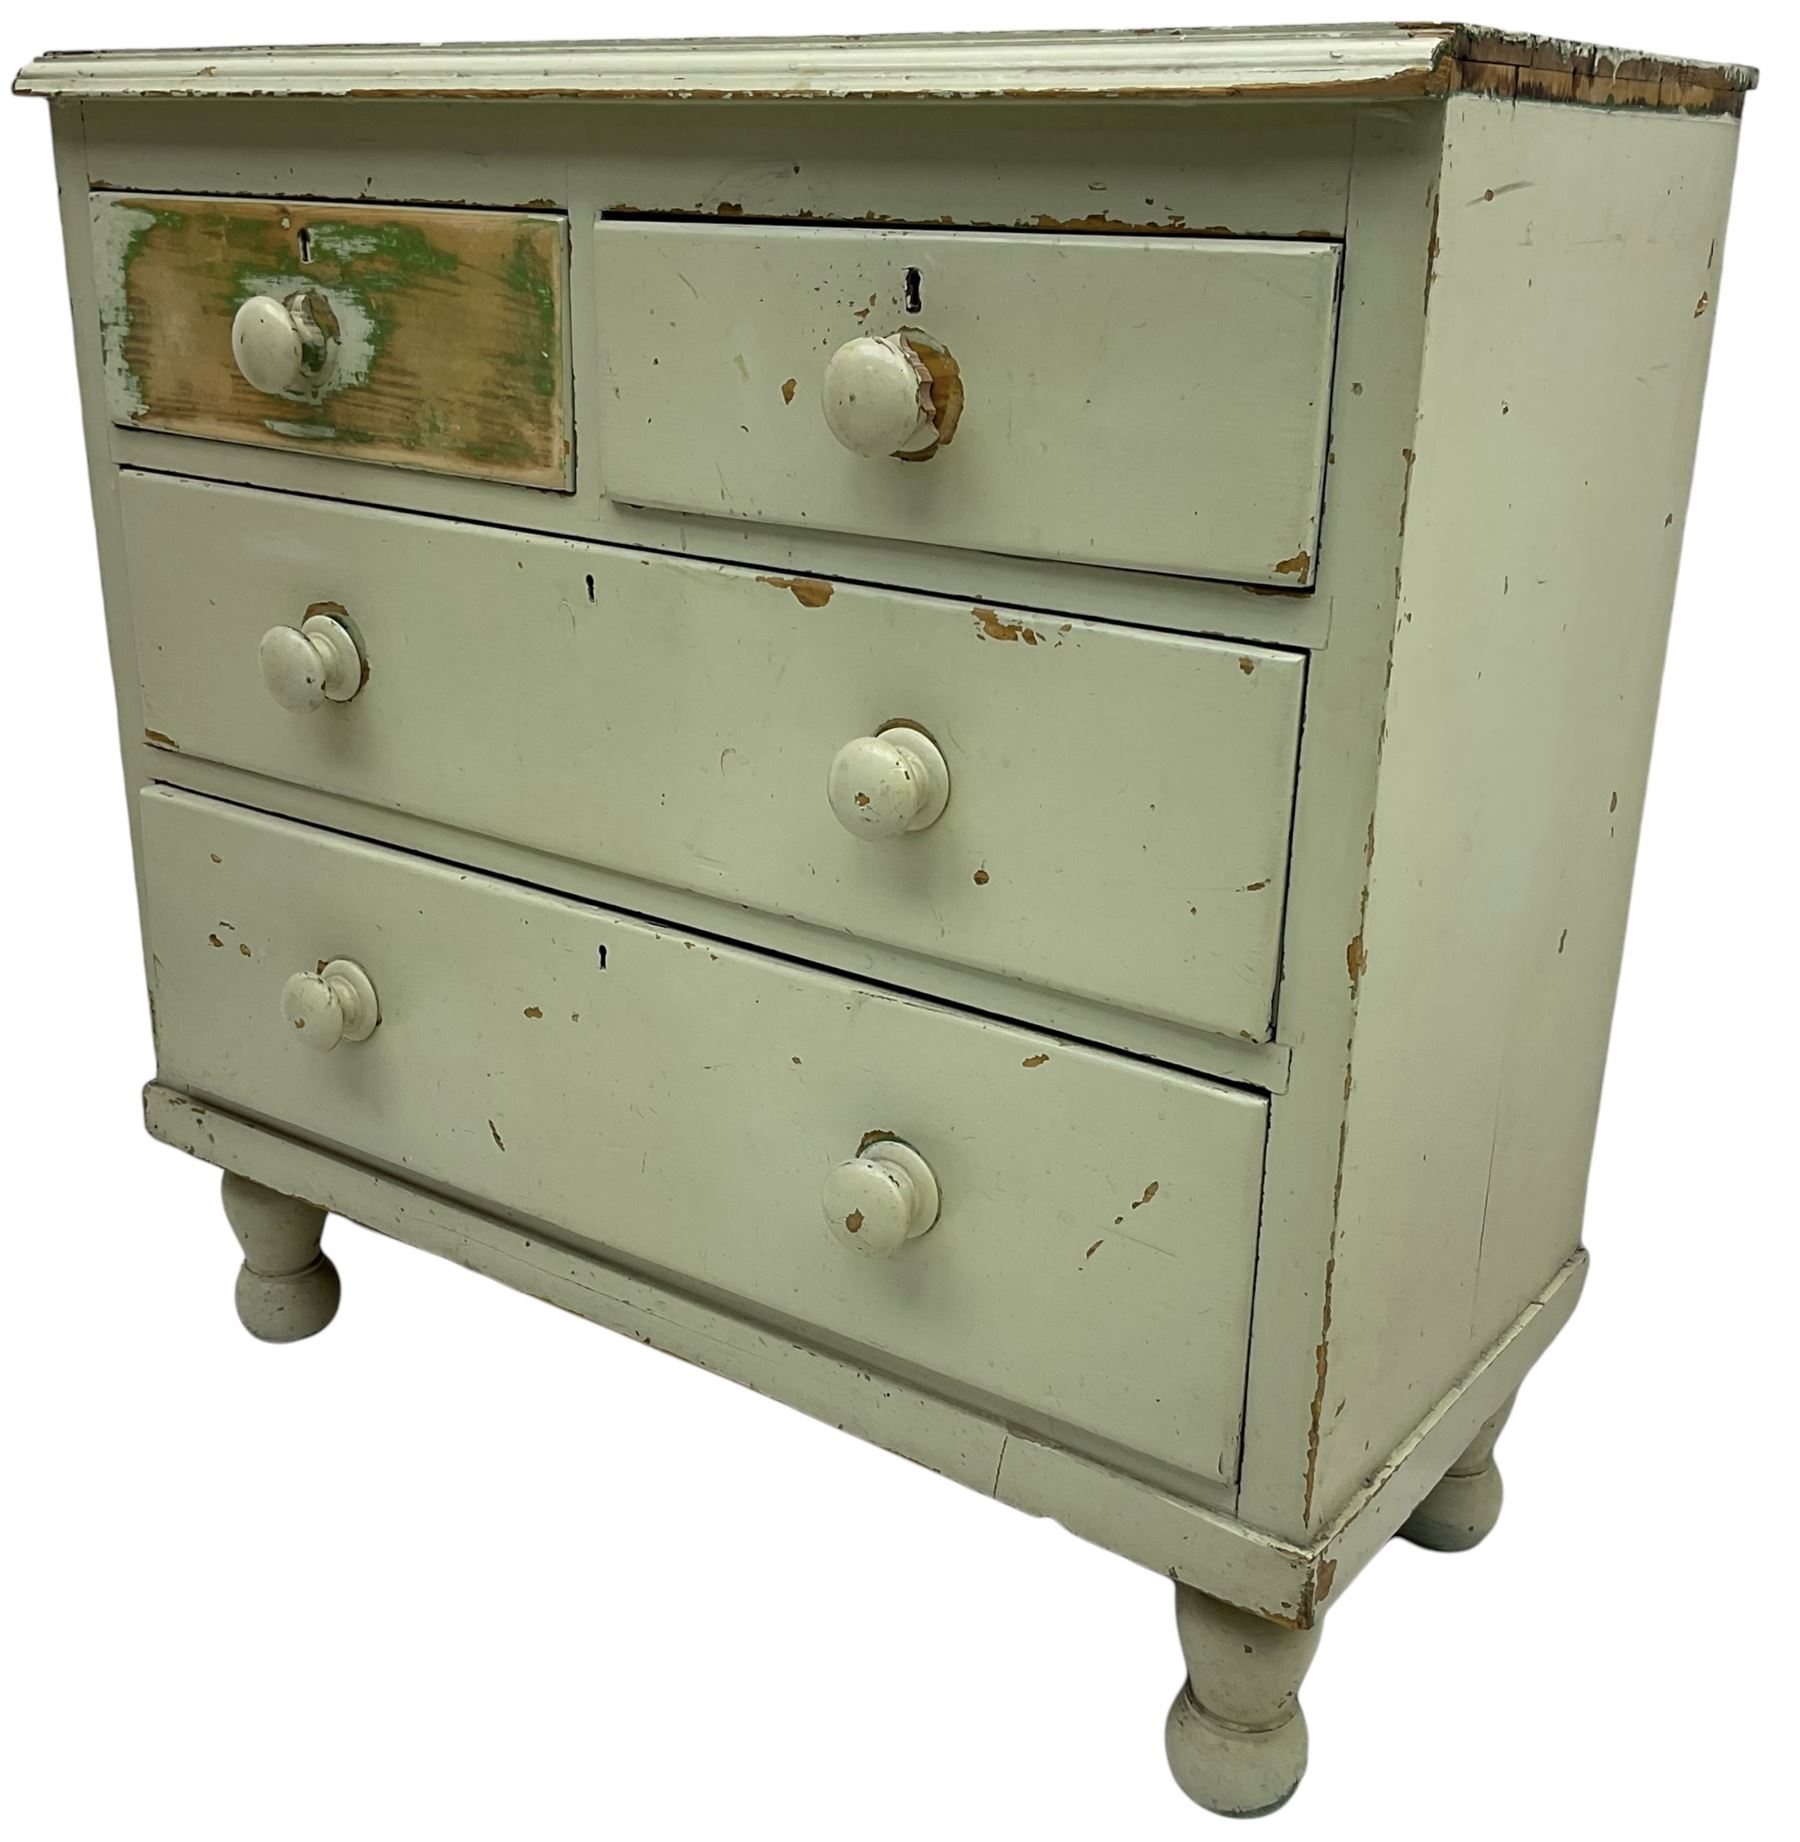 Victorian painted pine chest - Image 5 of 6